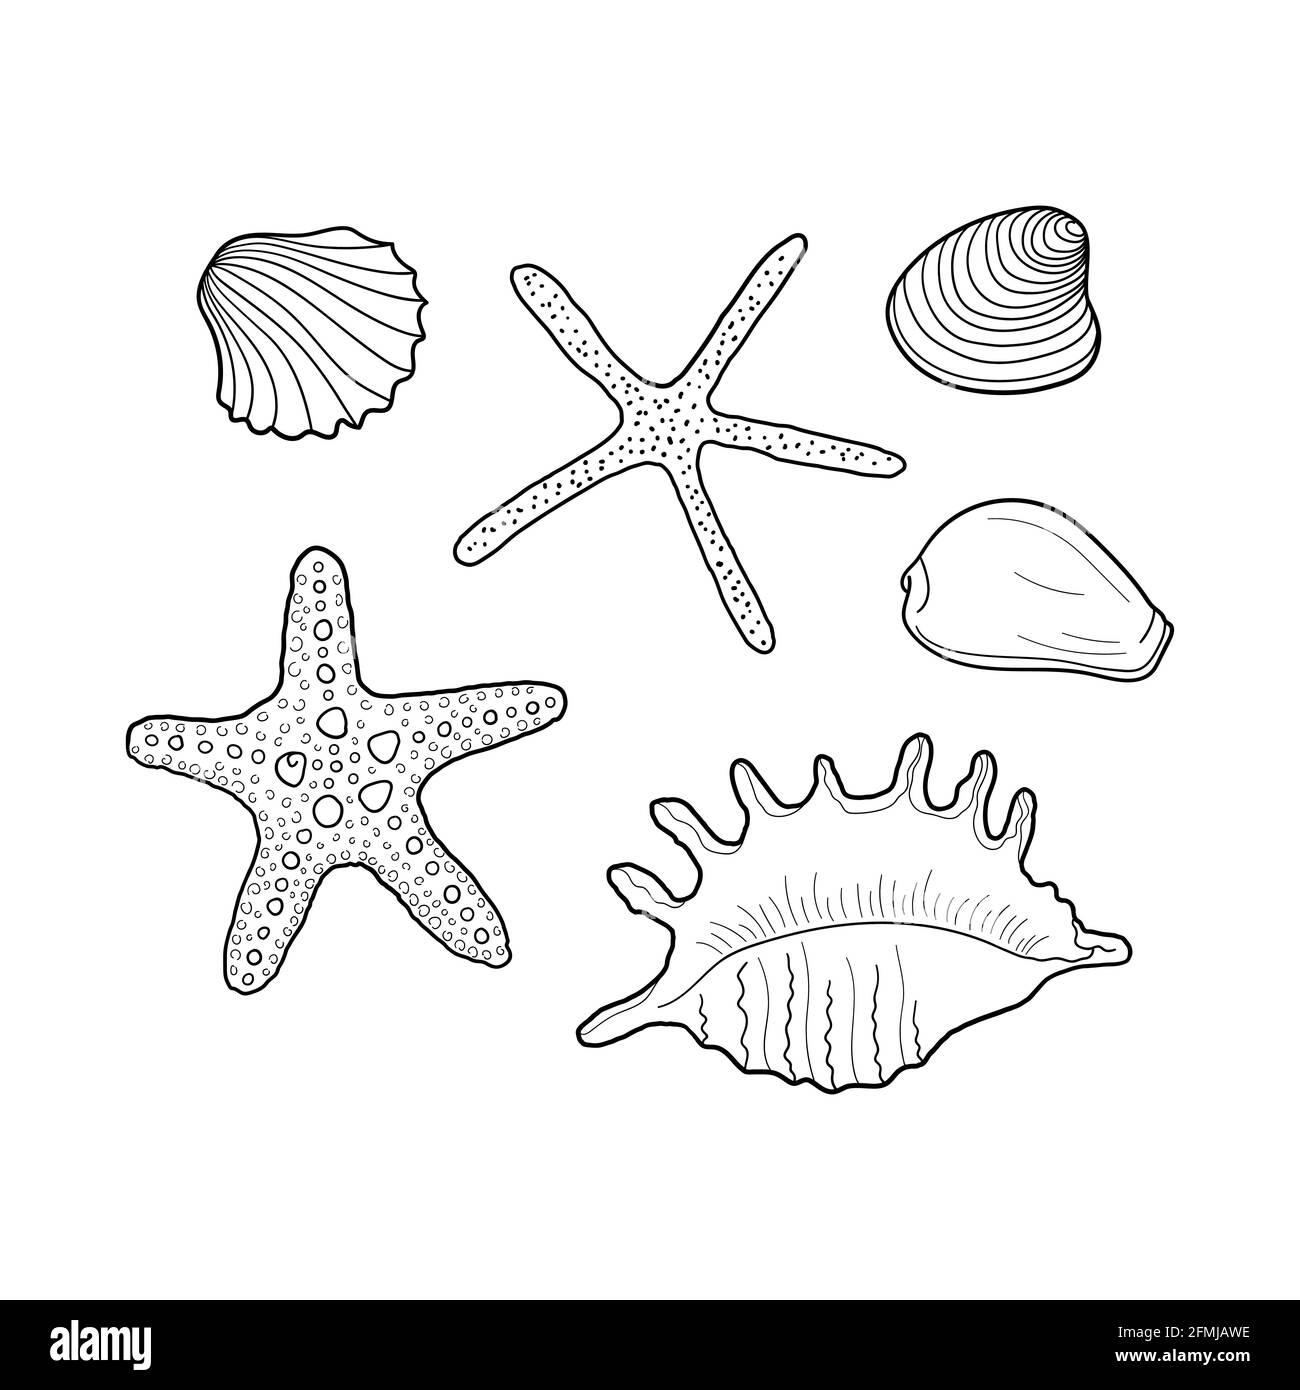 Seashells vector set. Collection of shells different forms. Hand-drawn illustrations of engraved line. Design element for invitations, greeting cards Stock Vector